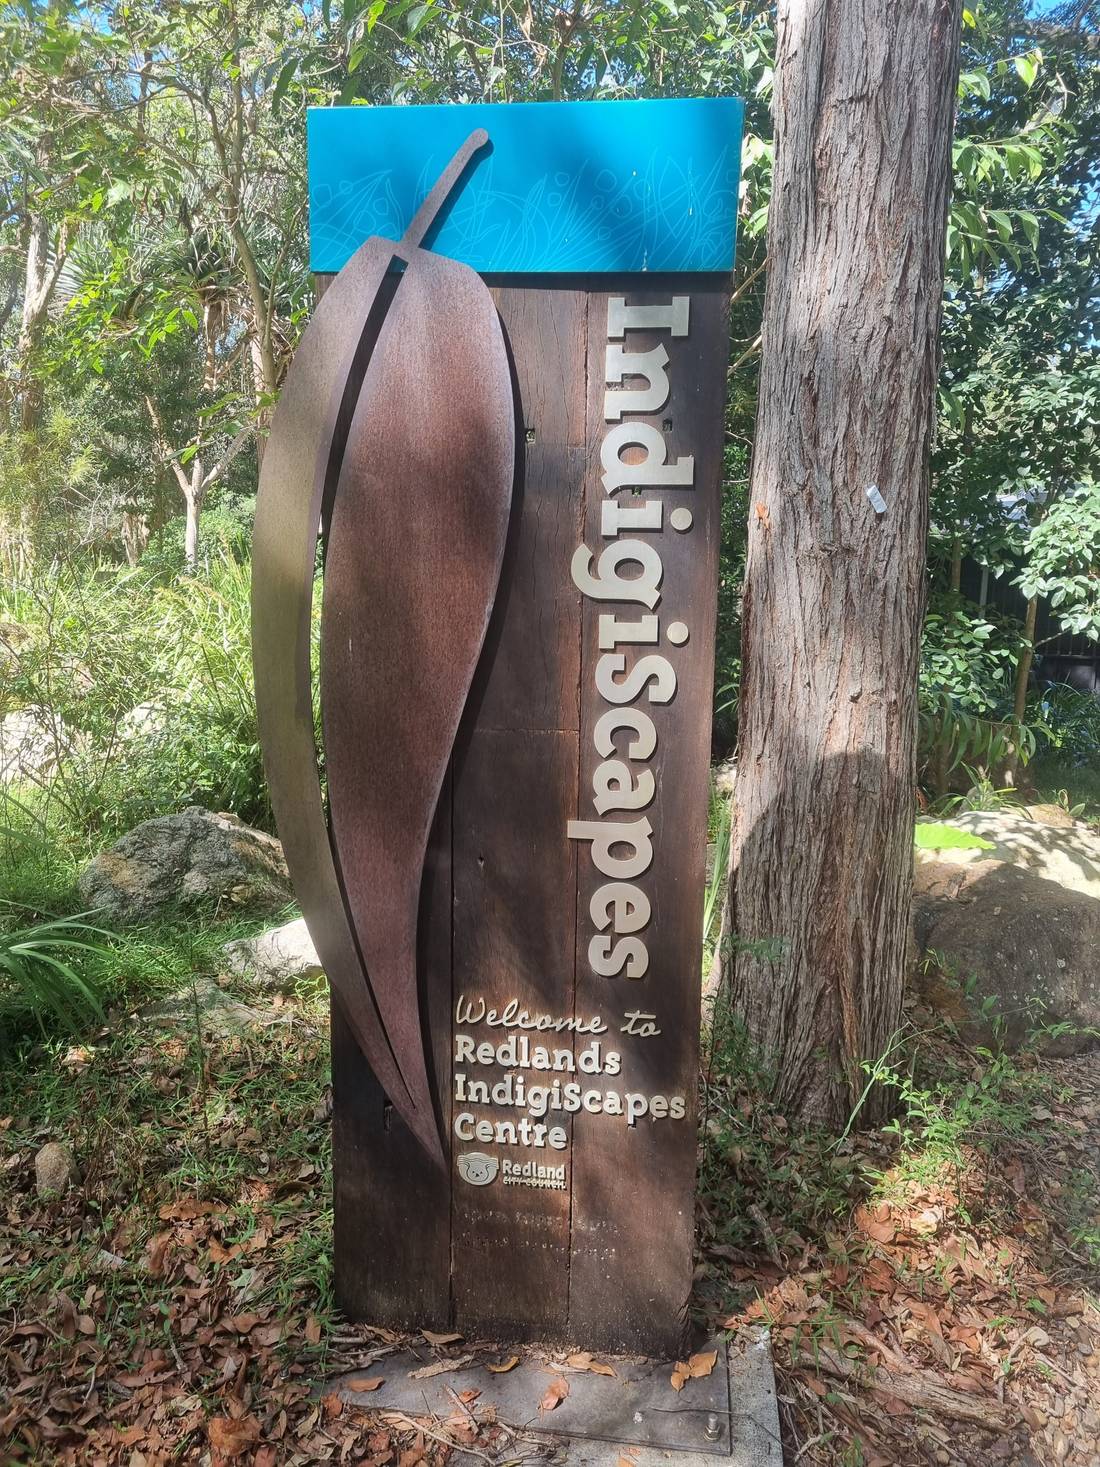 What a Cool name! I Never heard it before and it does not seem show up in any dictionary either. I guess they blended the words Indigenous and landscape together to come up with Indigiscapes. Which is an Environmental Educational Centre 20 kilometers east of Brisbane.